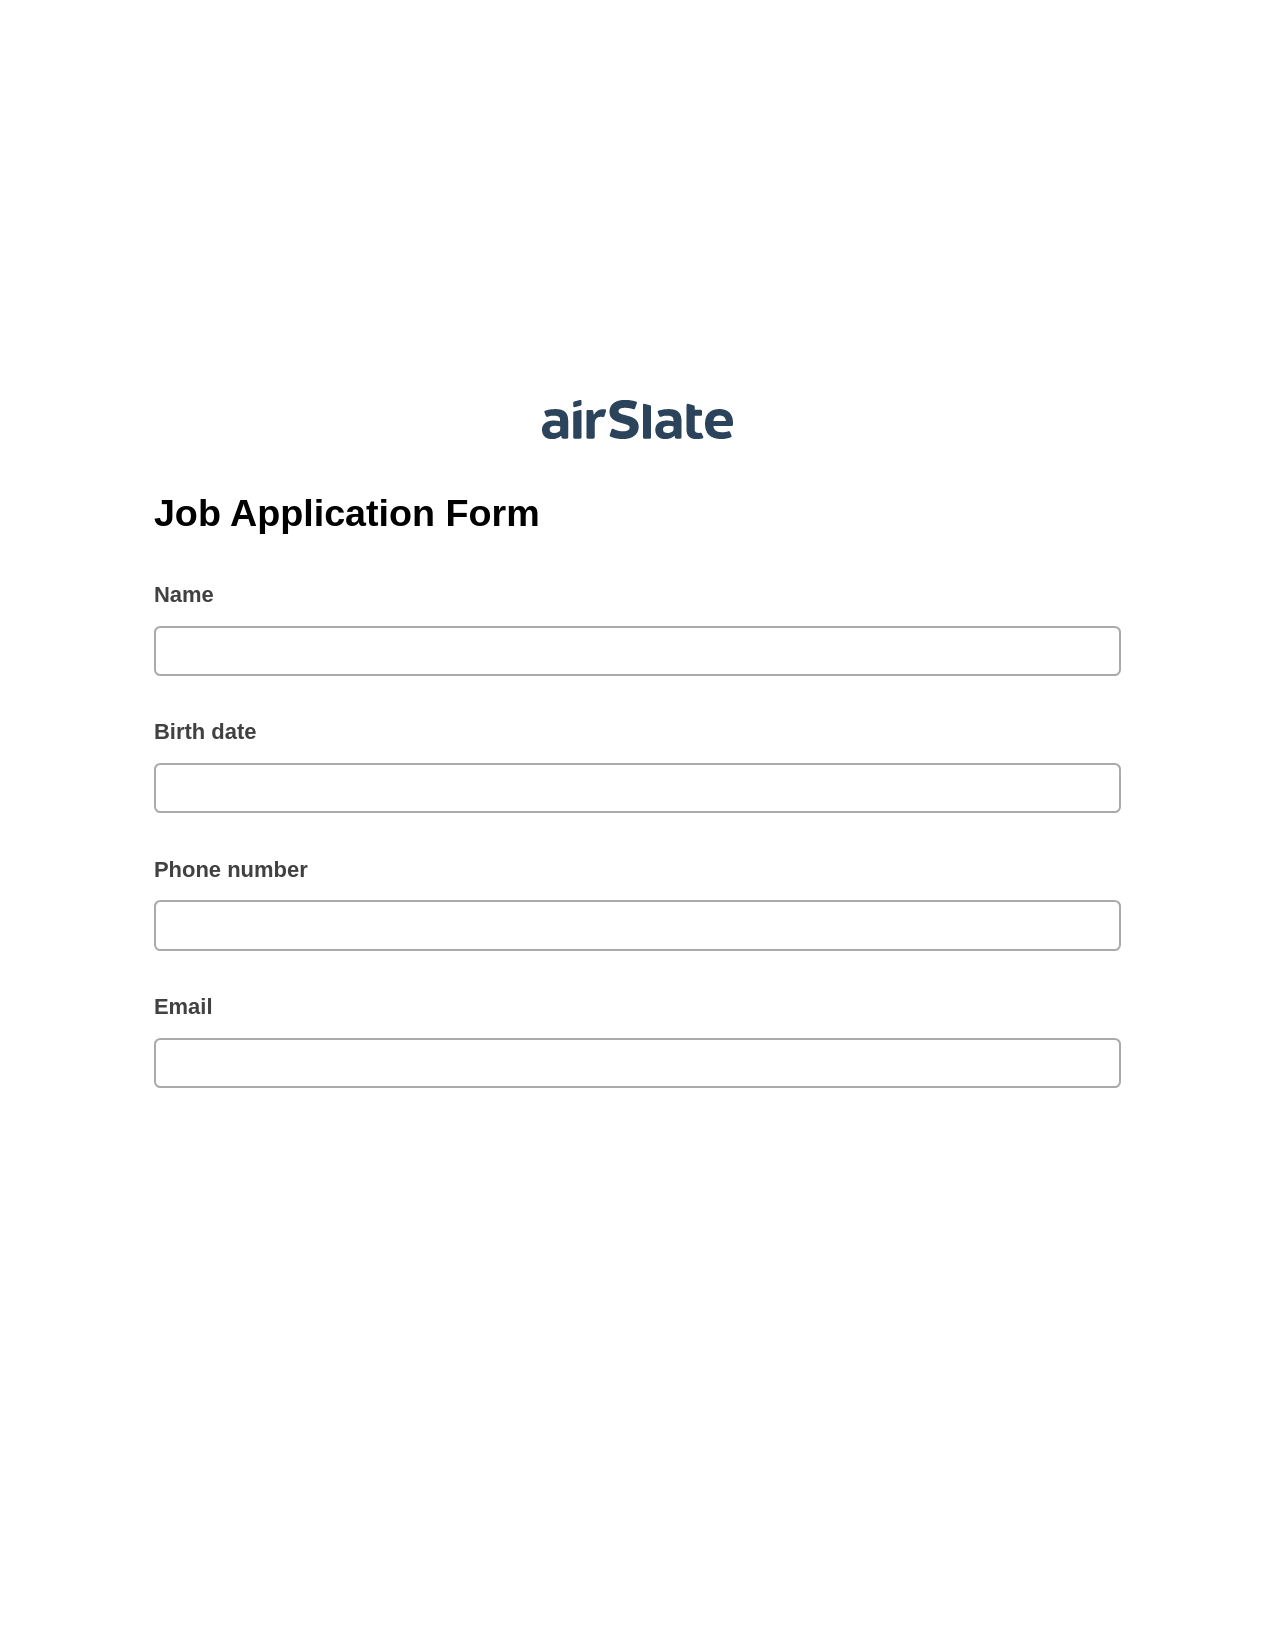 Job Application Form Pre-fill Dropdown from Airtable, Google Sheet Two-Way Binding Bot, Post-finish Document Bot